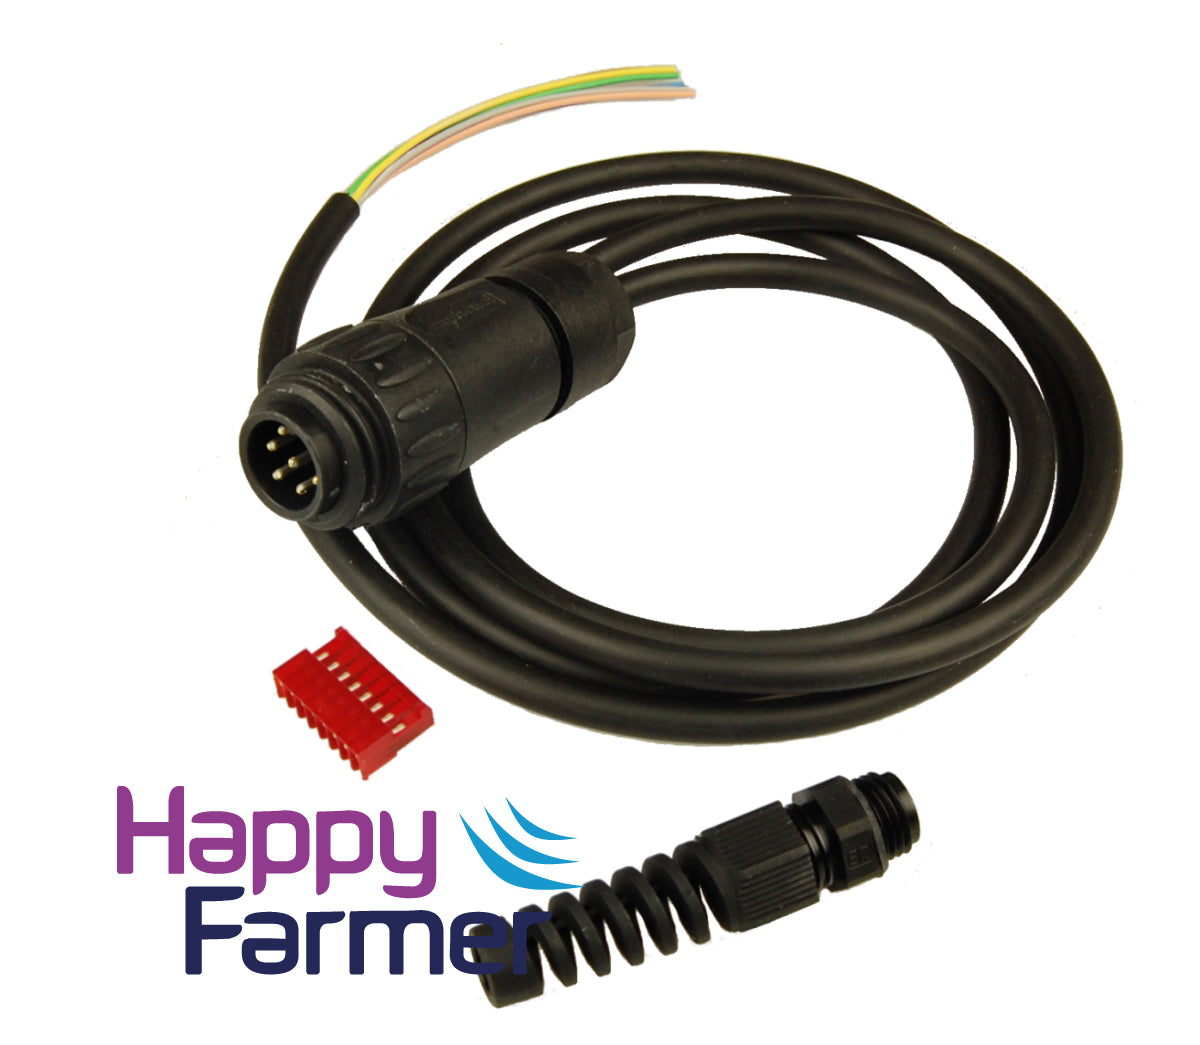 E-link cable red plug Lely Discovery